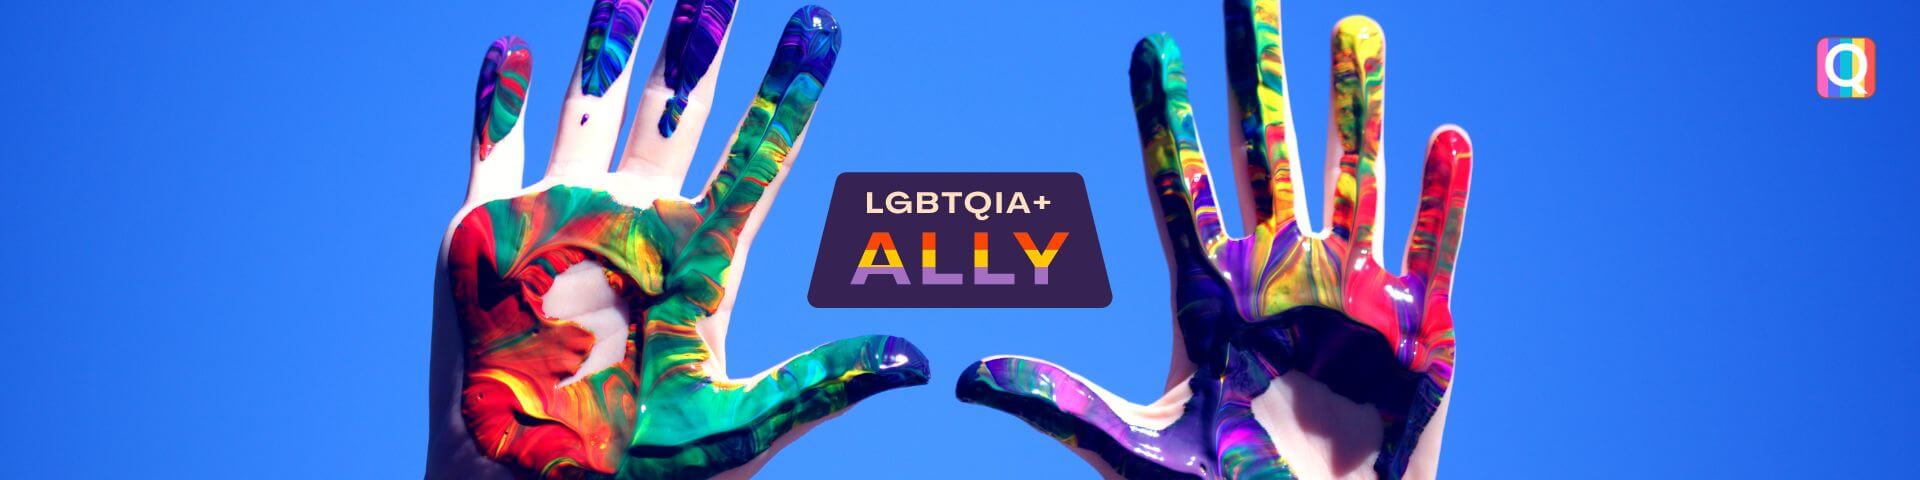 how to be lgbtq ally